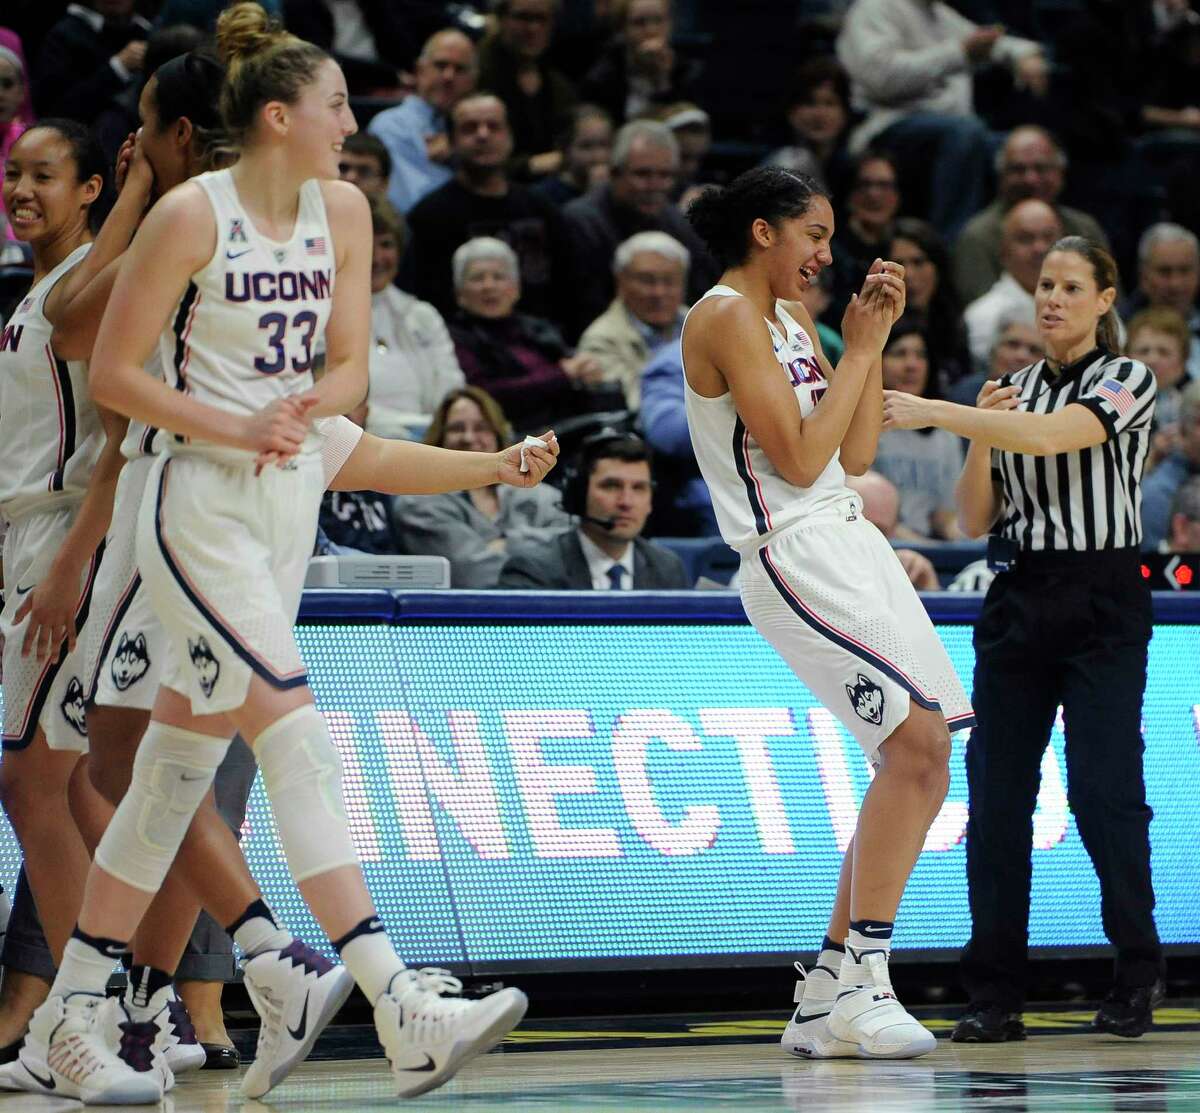 Connecticut's Gabby Williams, front right, reacts after taking an elbow to her tooth in the second half of an NCAA college basketball game against Tulane, Sunday, Jan. 22, 2017, in Storrs, Conn.